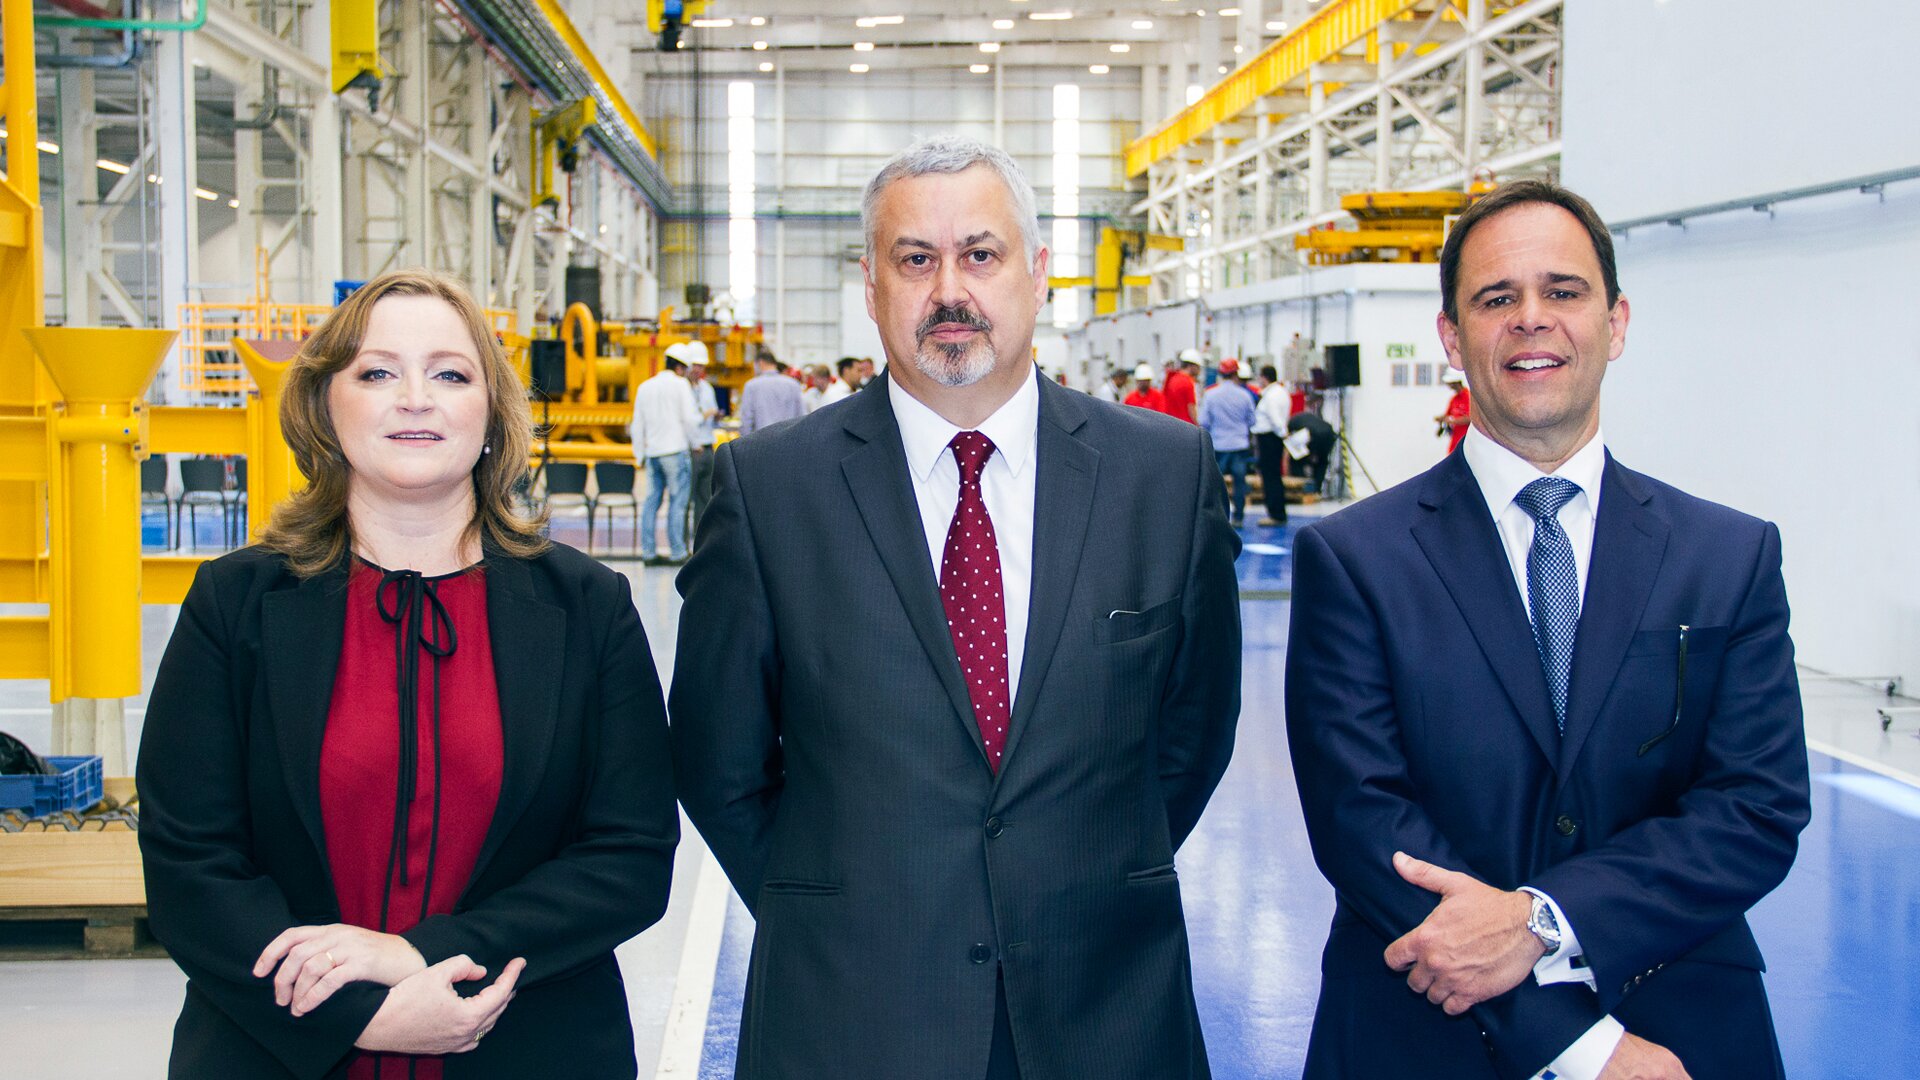 Maria Peralta, Alan Brunnen and Luis Araujo at the opening of the new subsea plant in Curitiba.